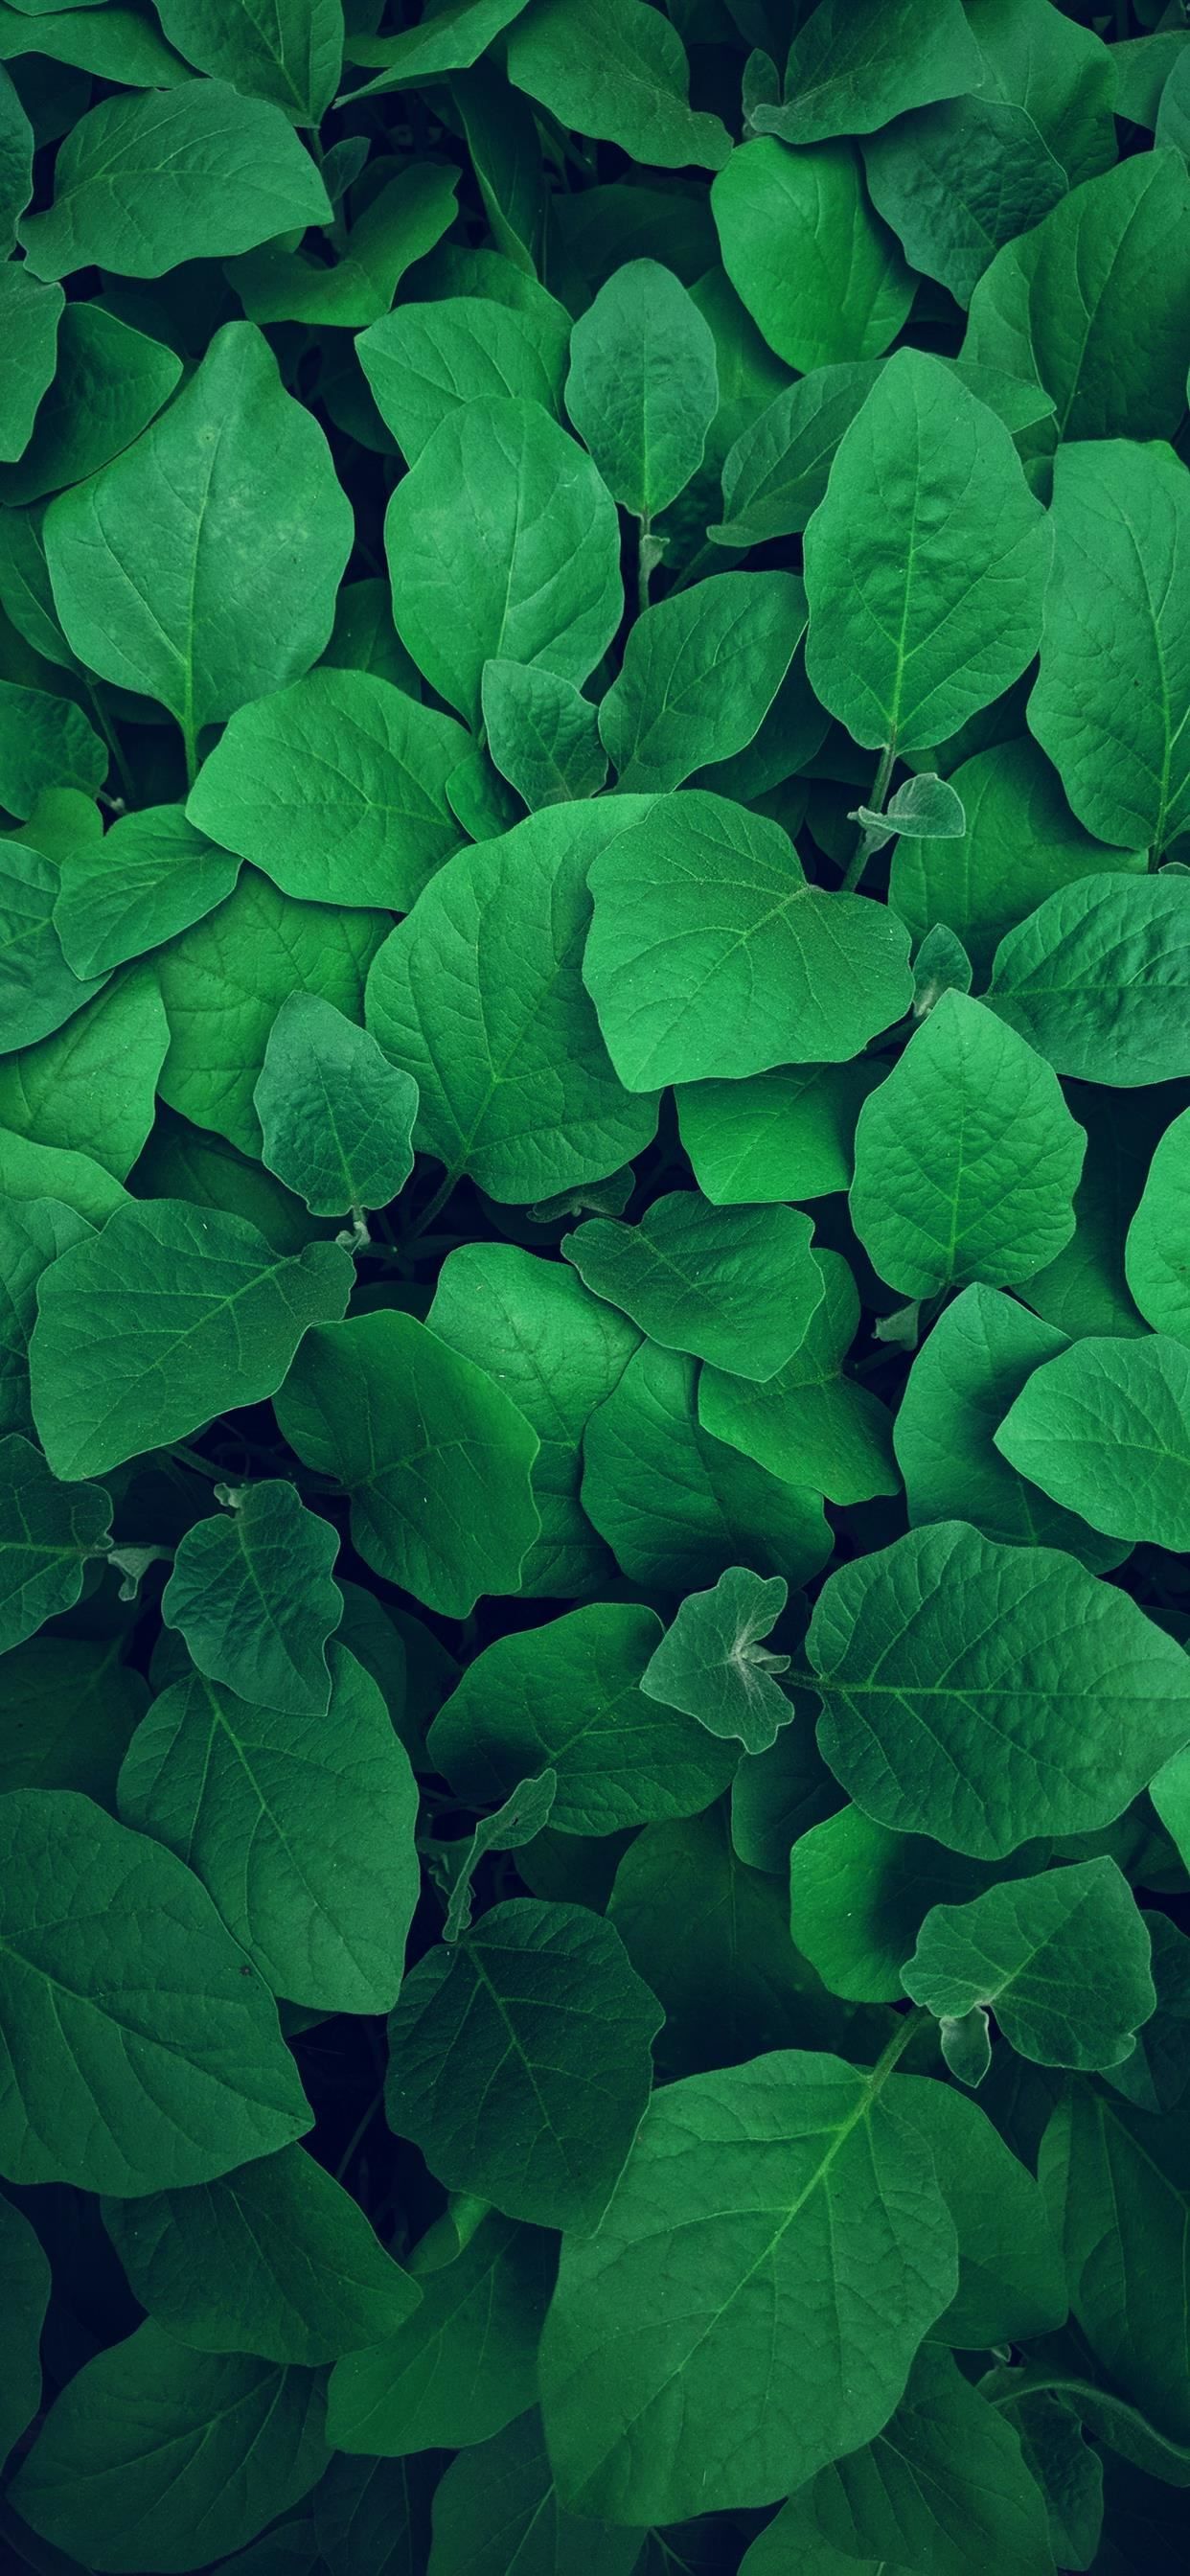 Green leaves wallpaper for your iPhone X from Everpix - Farm